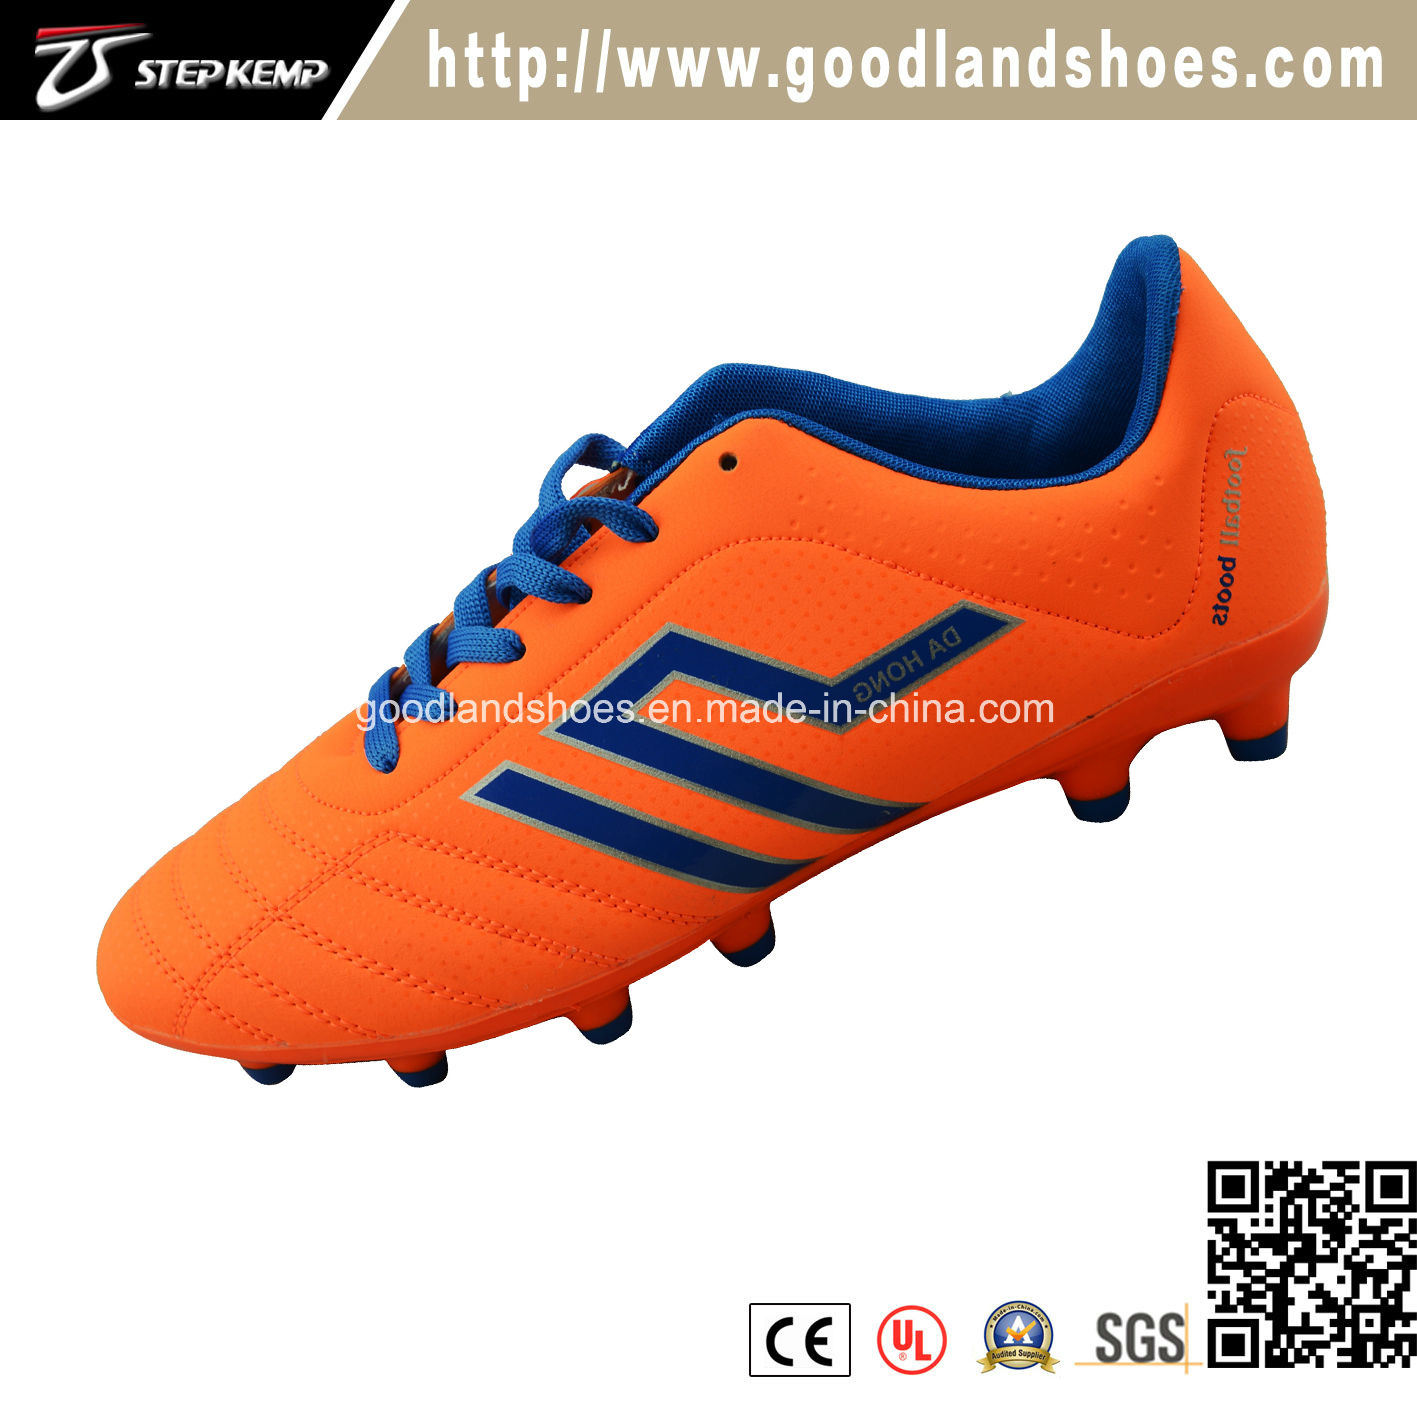 New Outdoor Soccer Shoes Casual Football Shoes 20112b-2